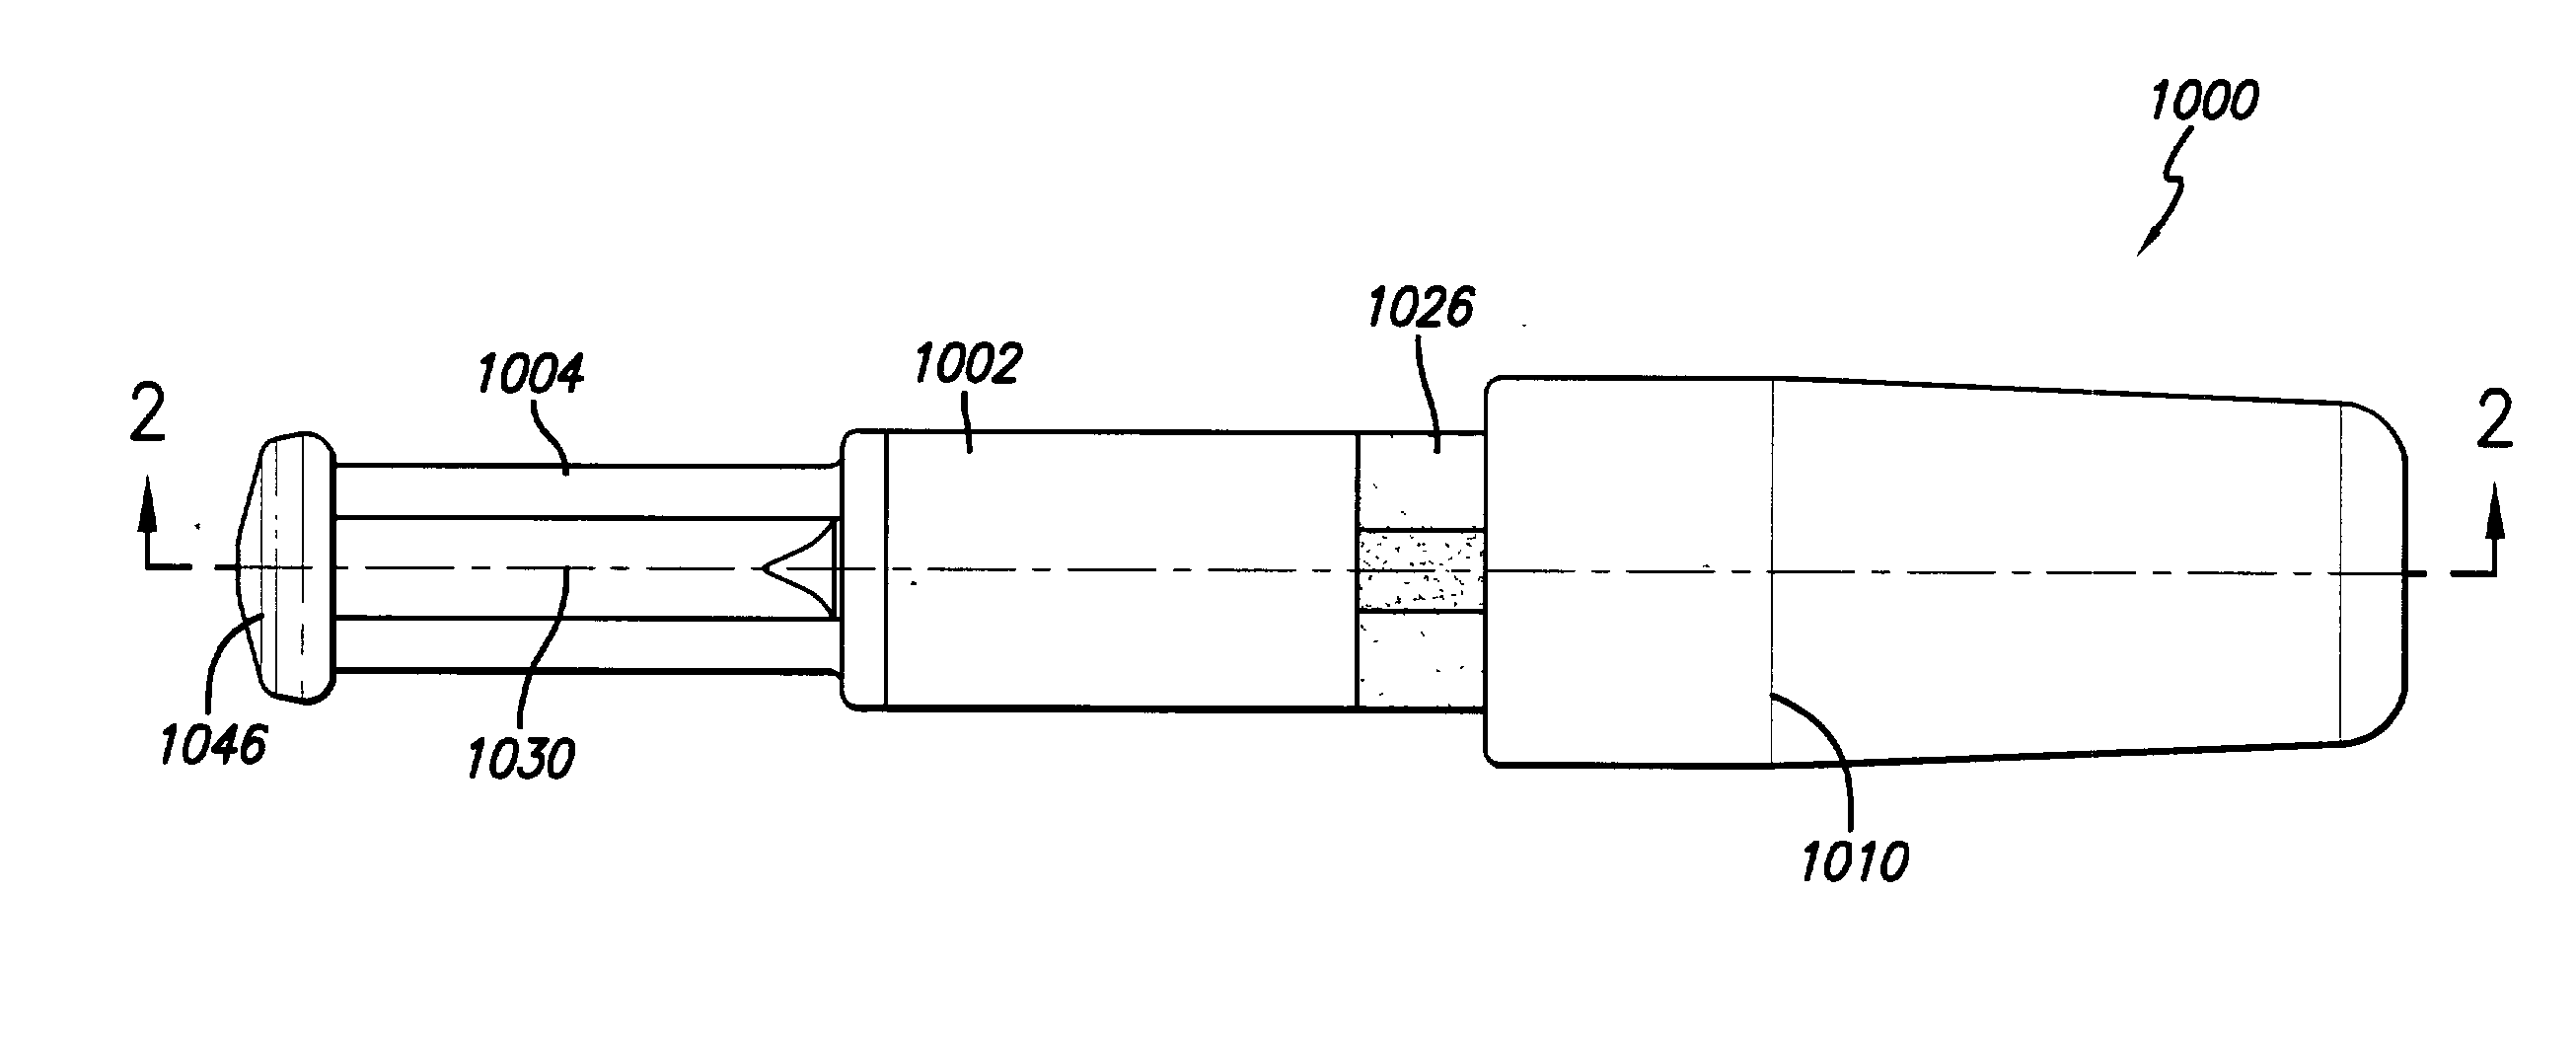 Method and apparatus for needle-less injection with a degassed fluid